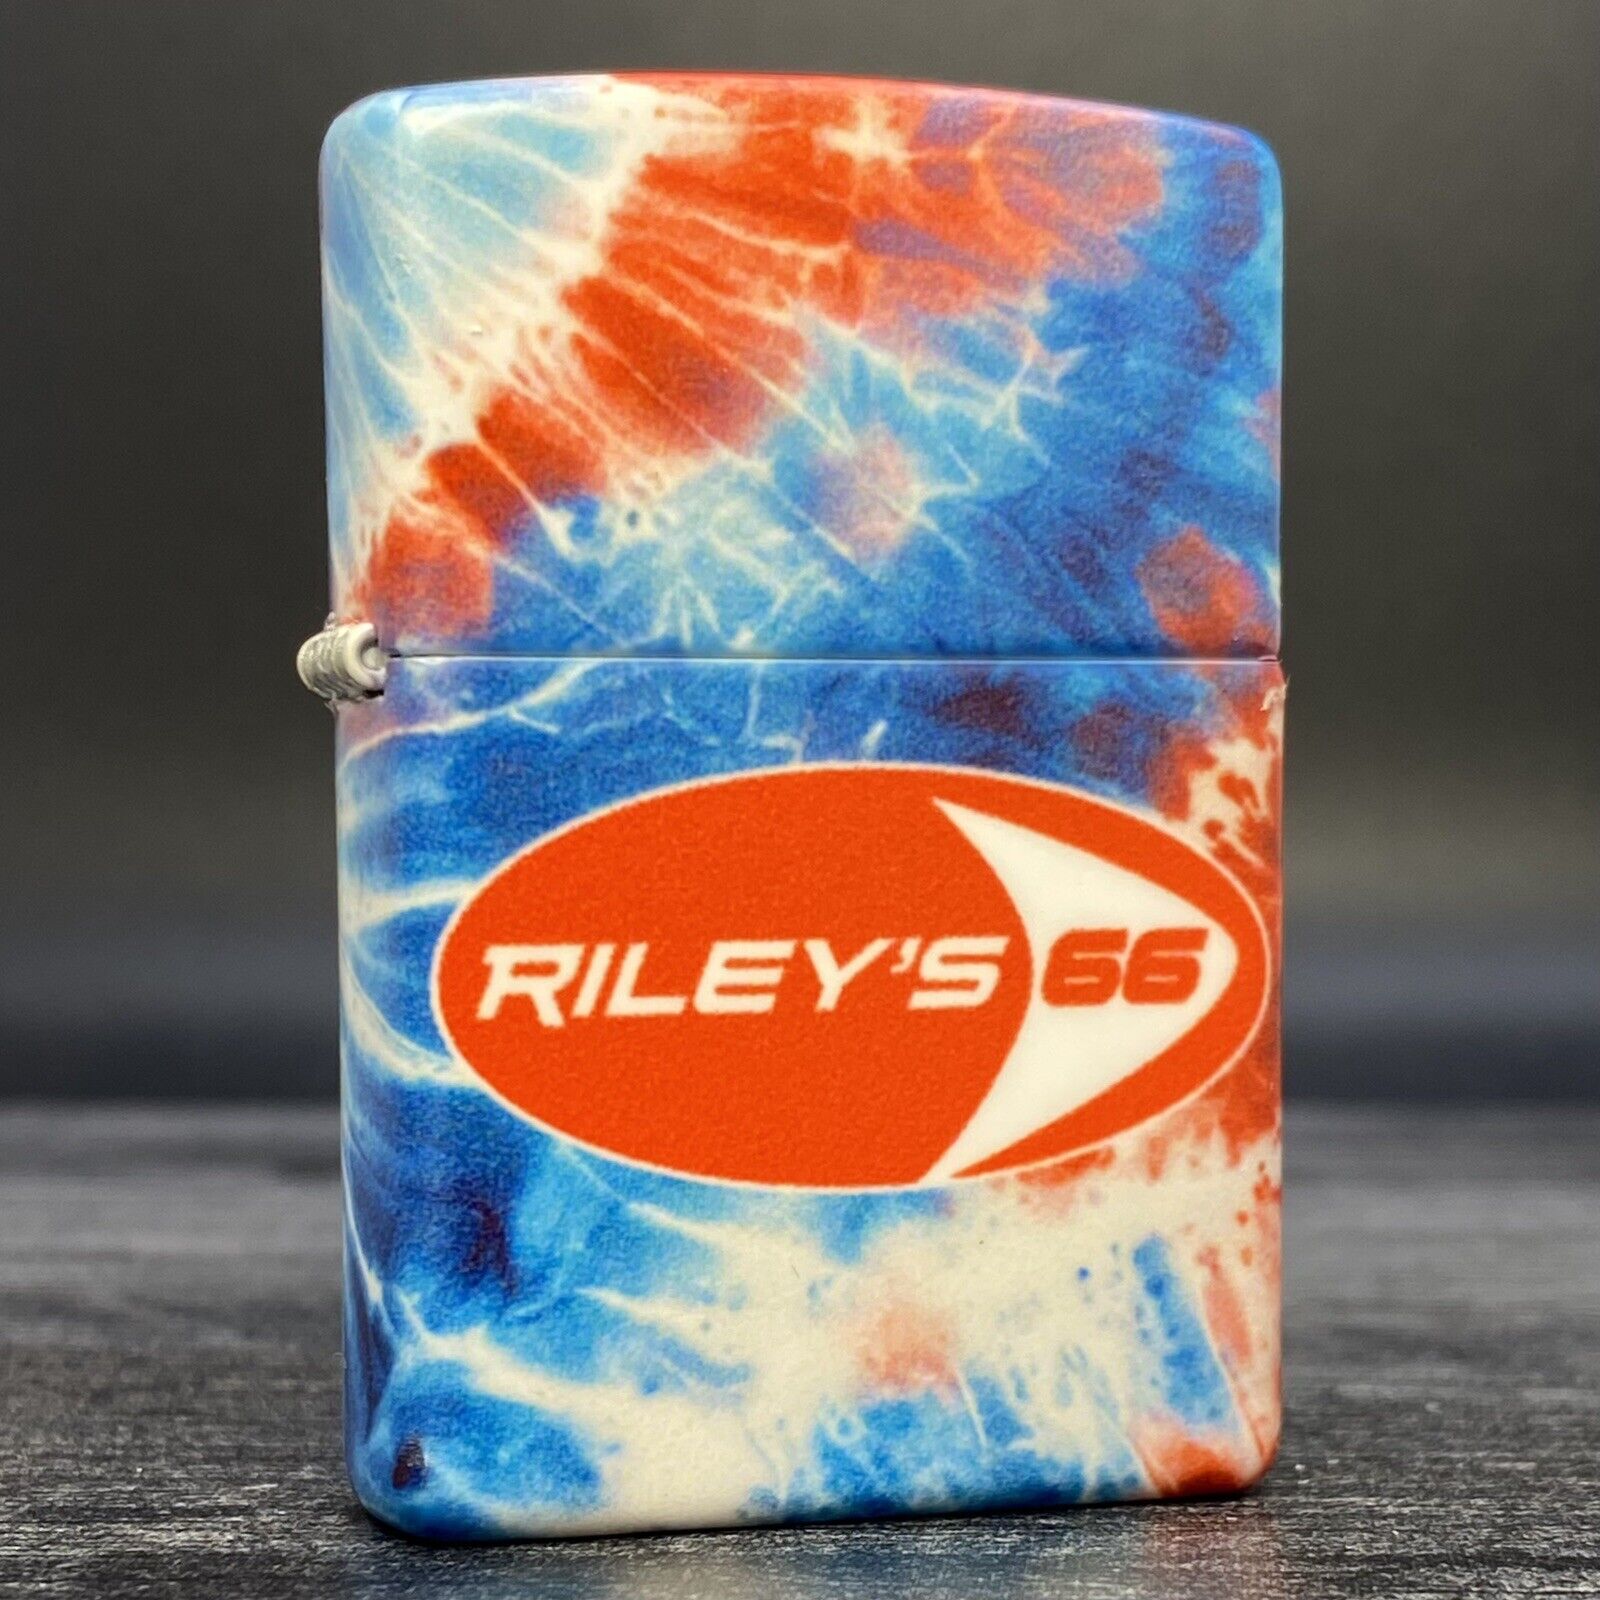 EXCLUSIVE Riley's 66 Zippo Lighter - Red, White & Blue Tie Dye - 540 Color